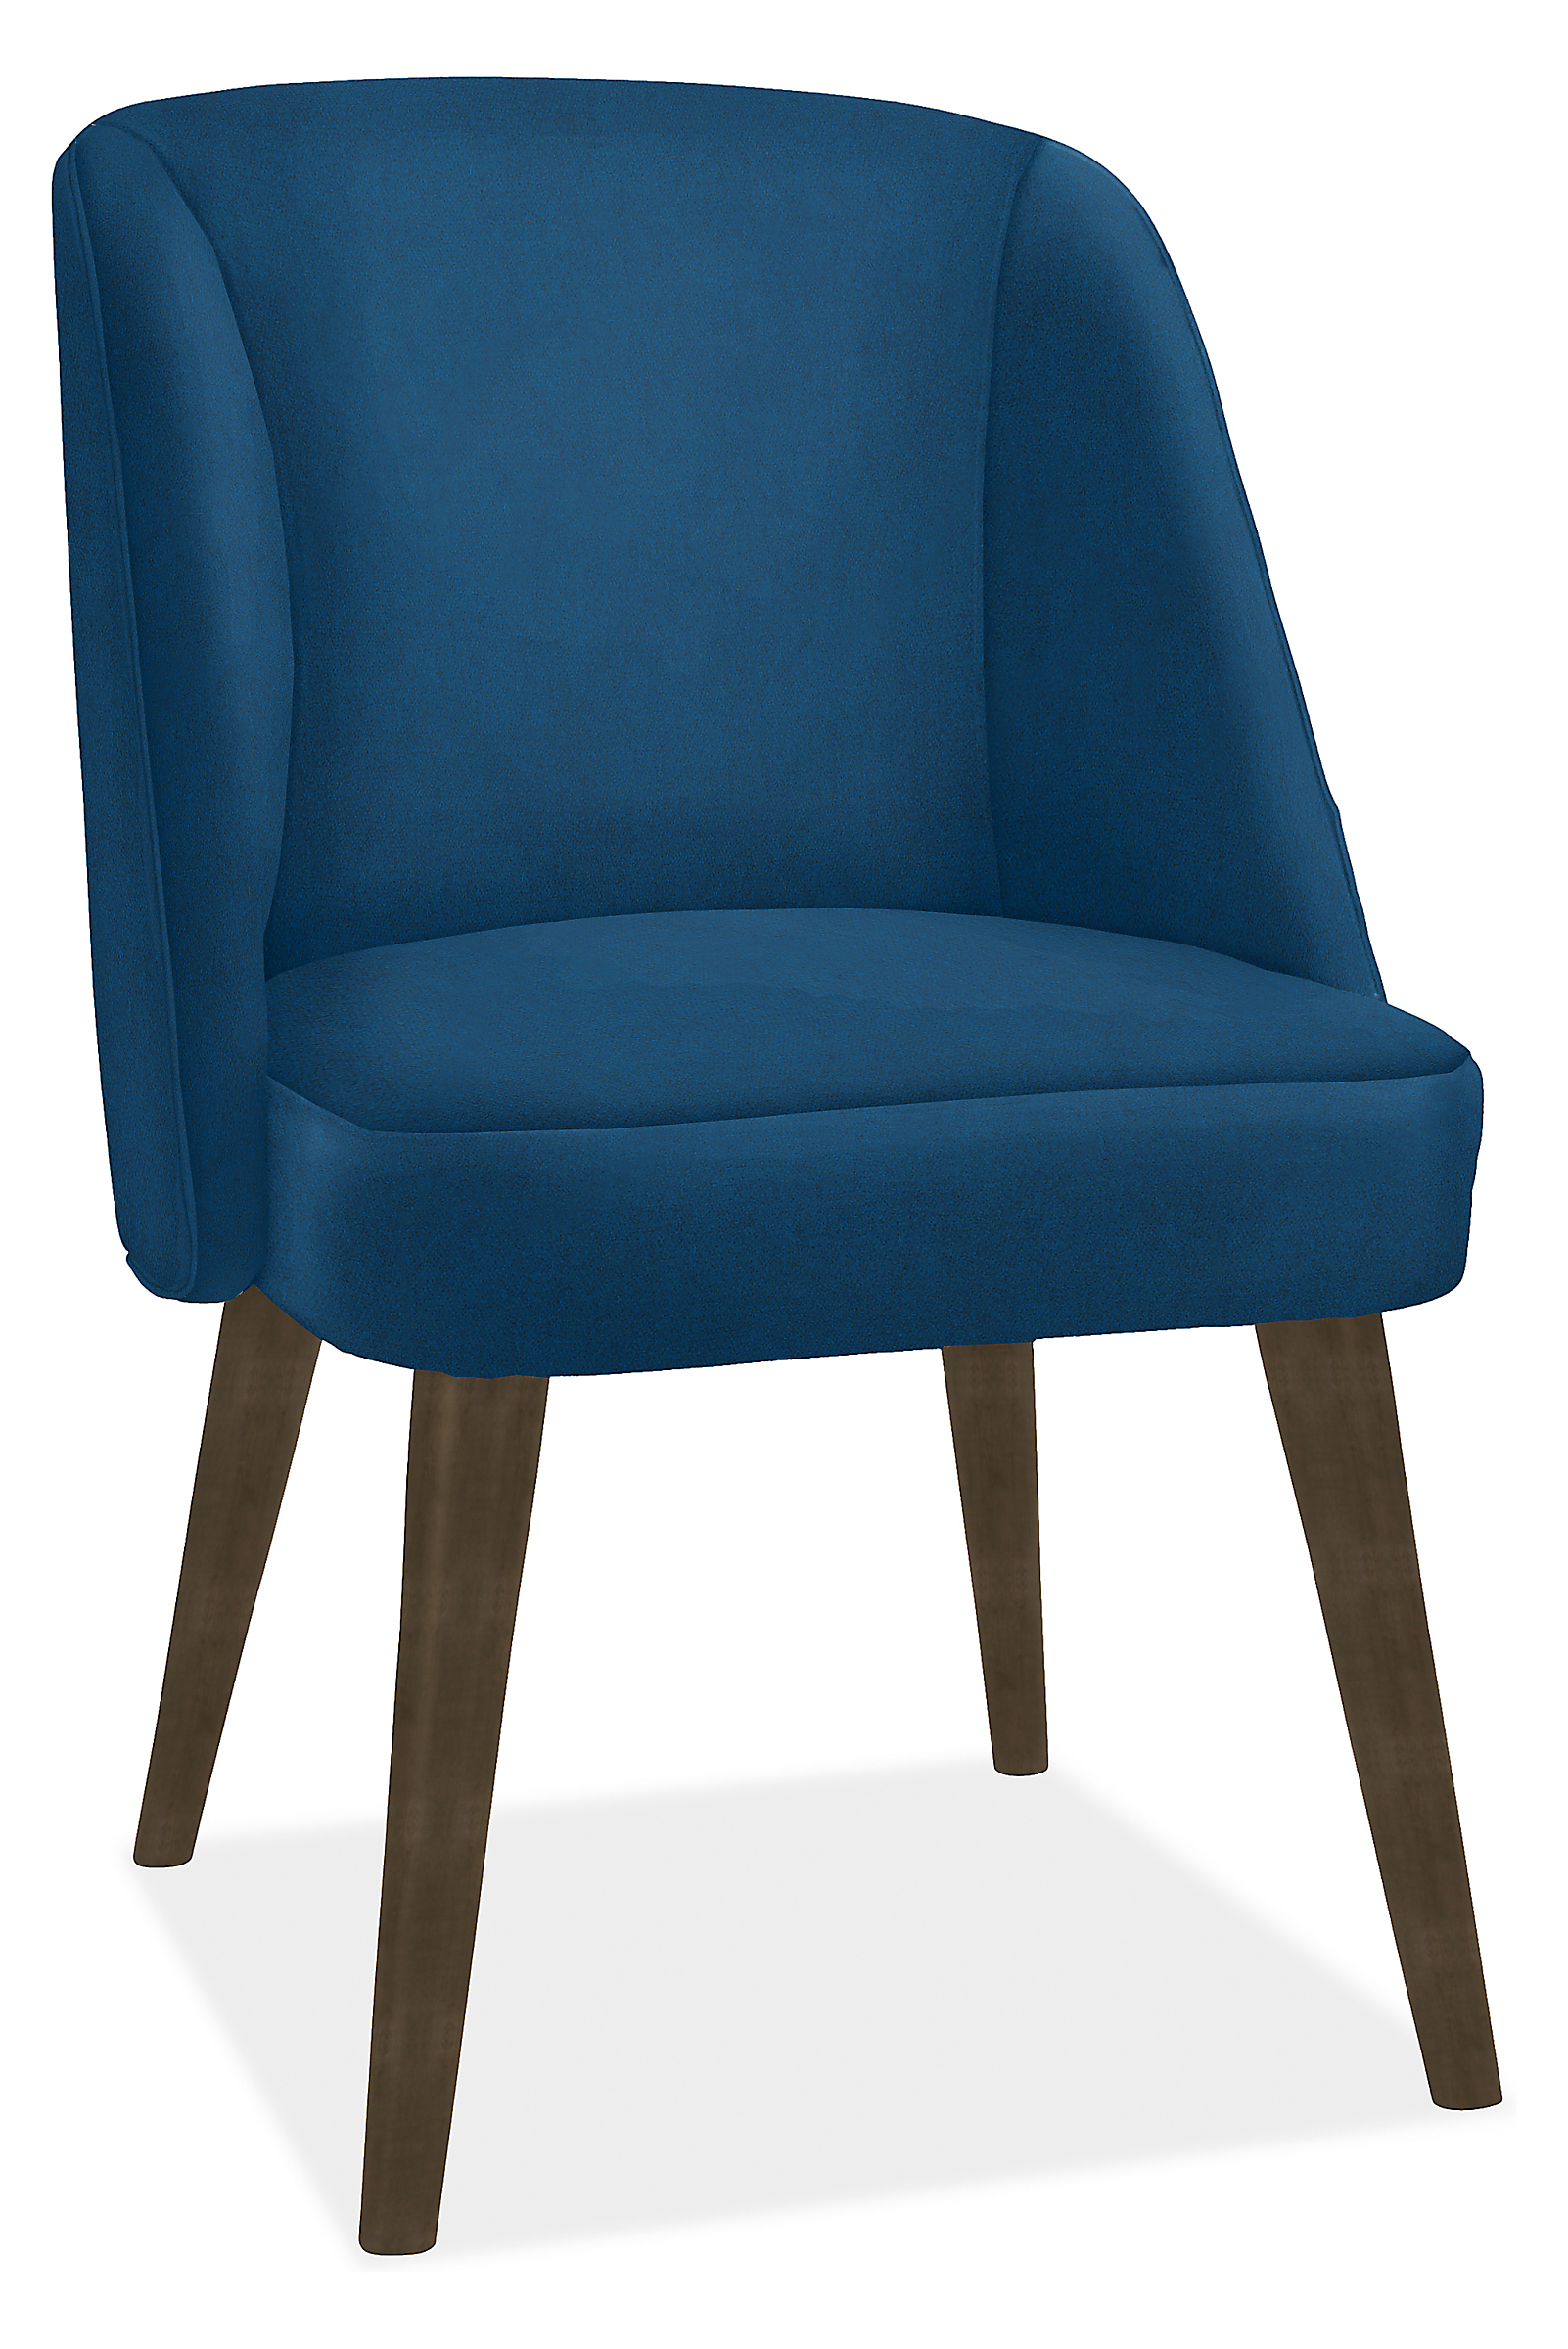 Cora Side Chair in Banks Denim with Charcoal Legs